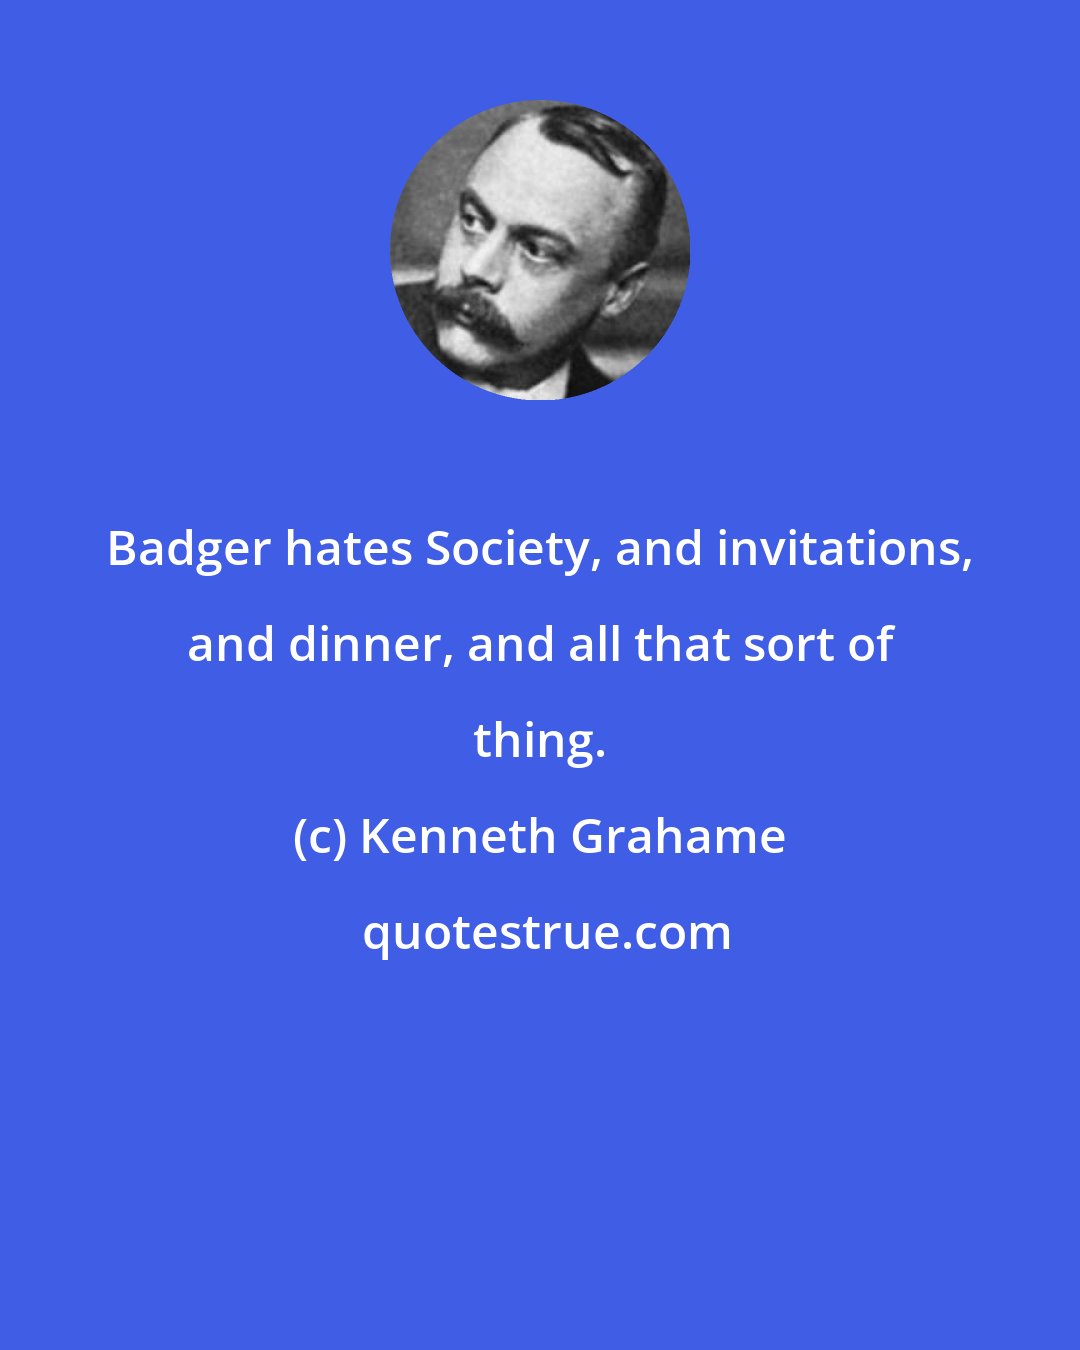 Kenneth Grahame: Badger hates Society, and invitations, and dinner, and all that sort of thing.